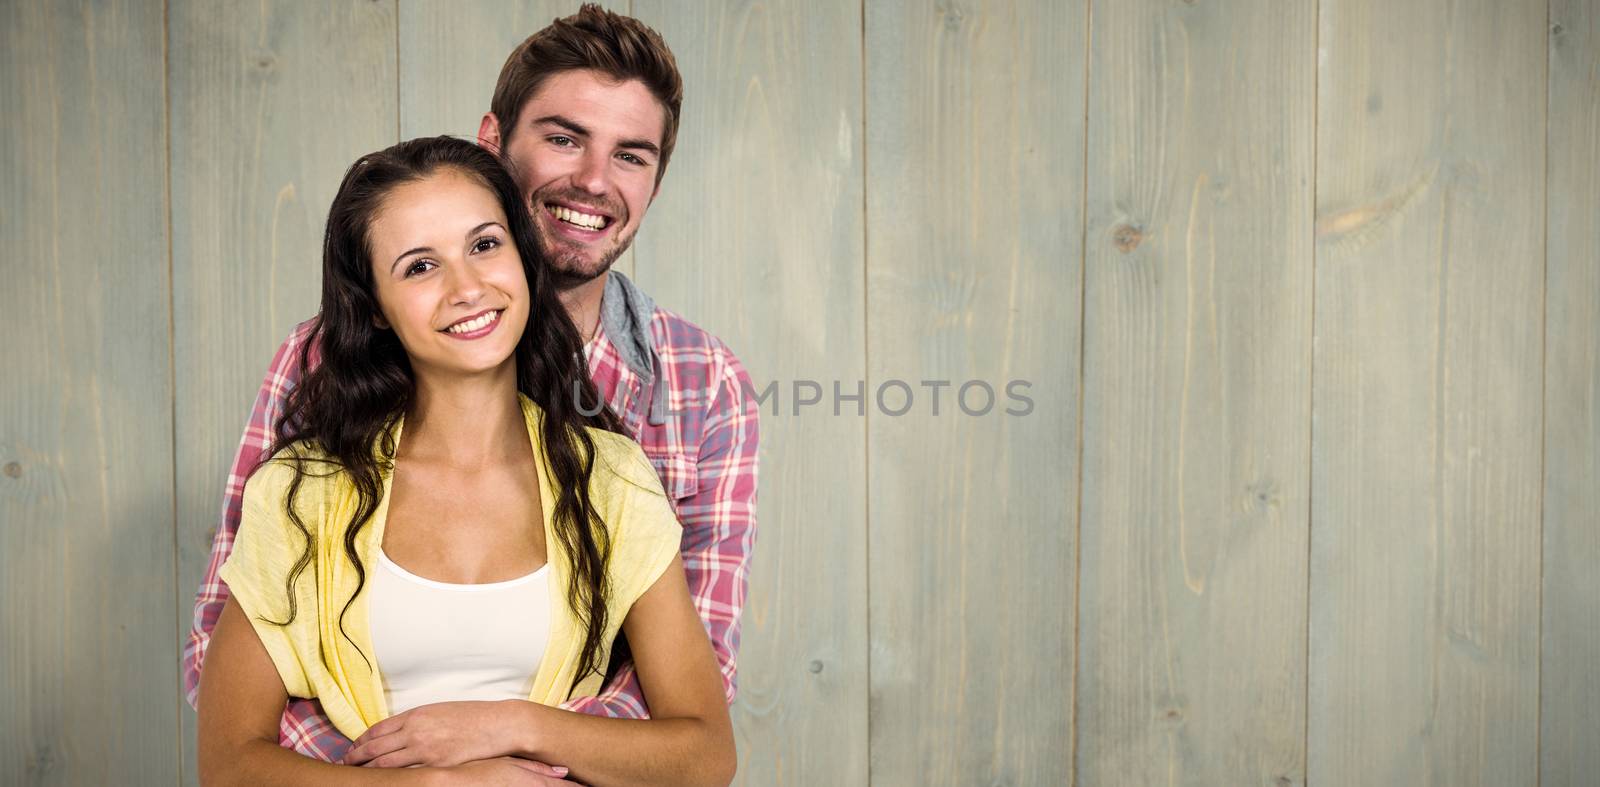 Happy couple hugging and looking at camera against wooden planks